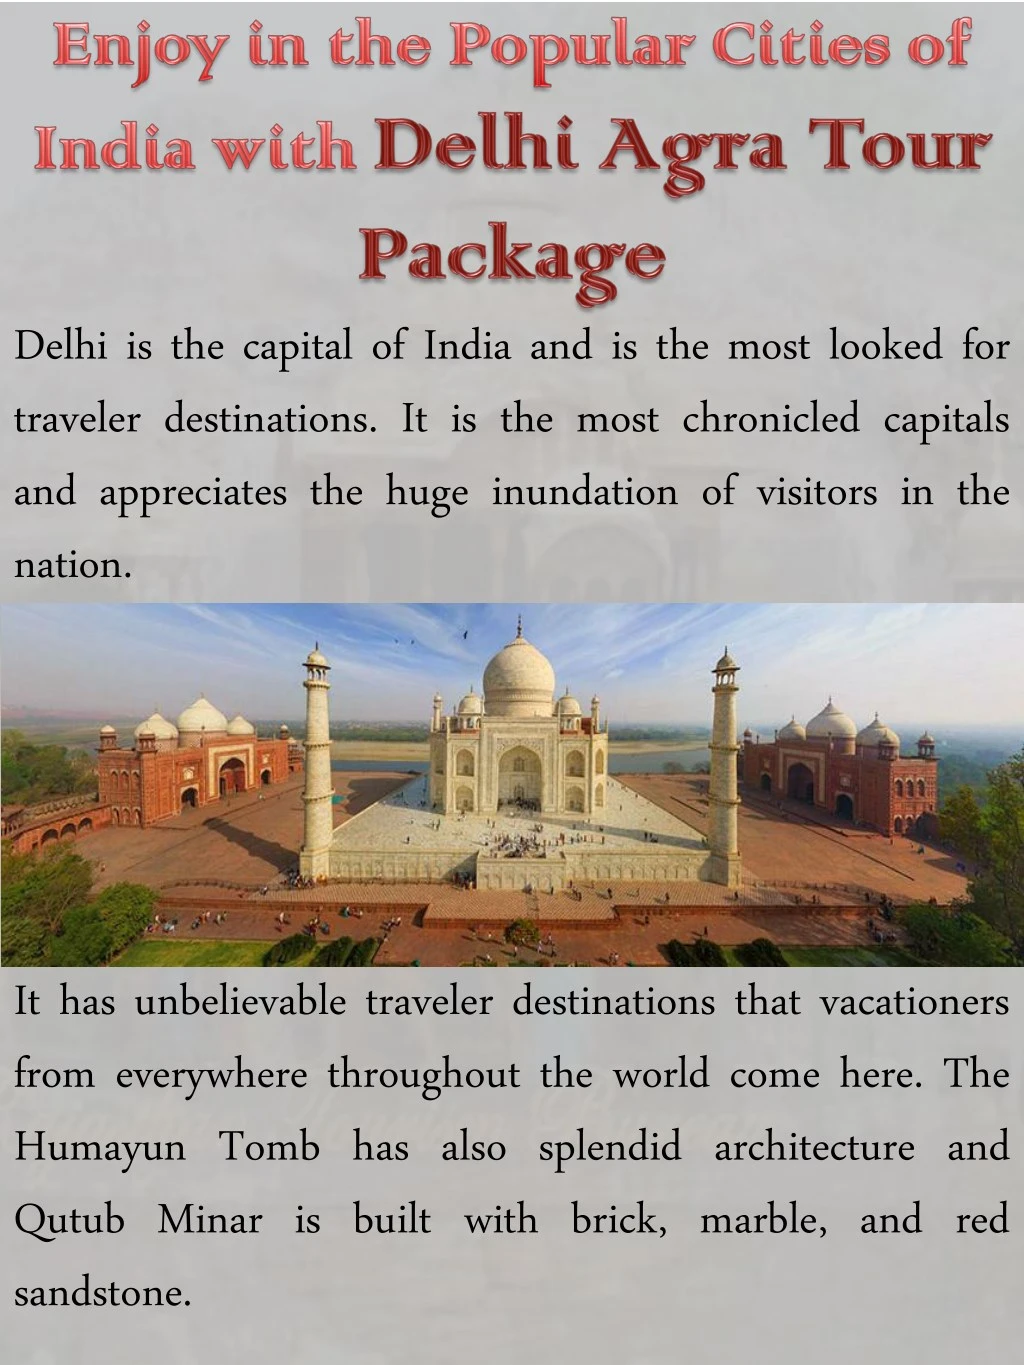 delhi is the capital of india and is the most